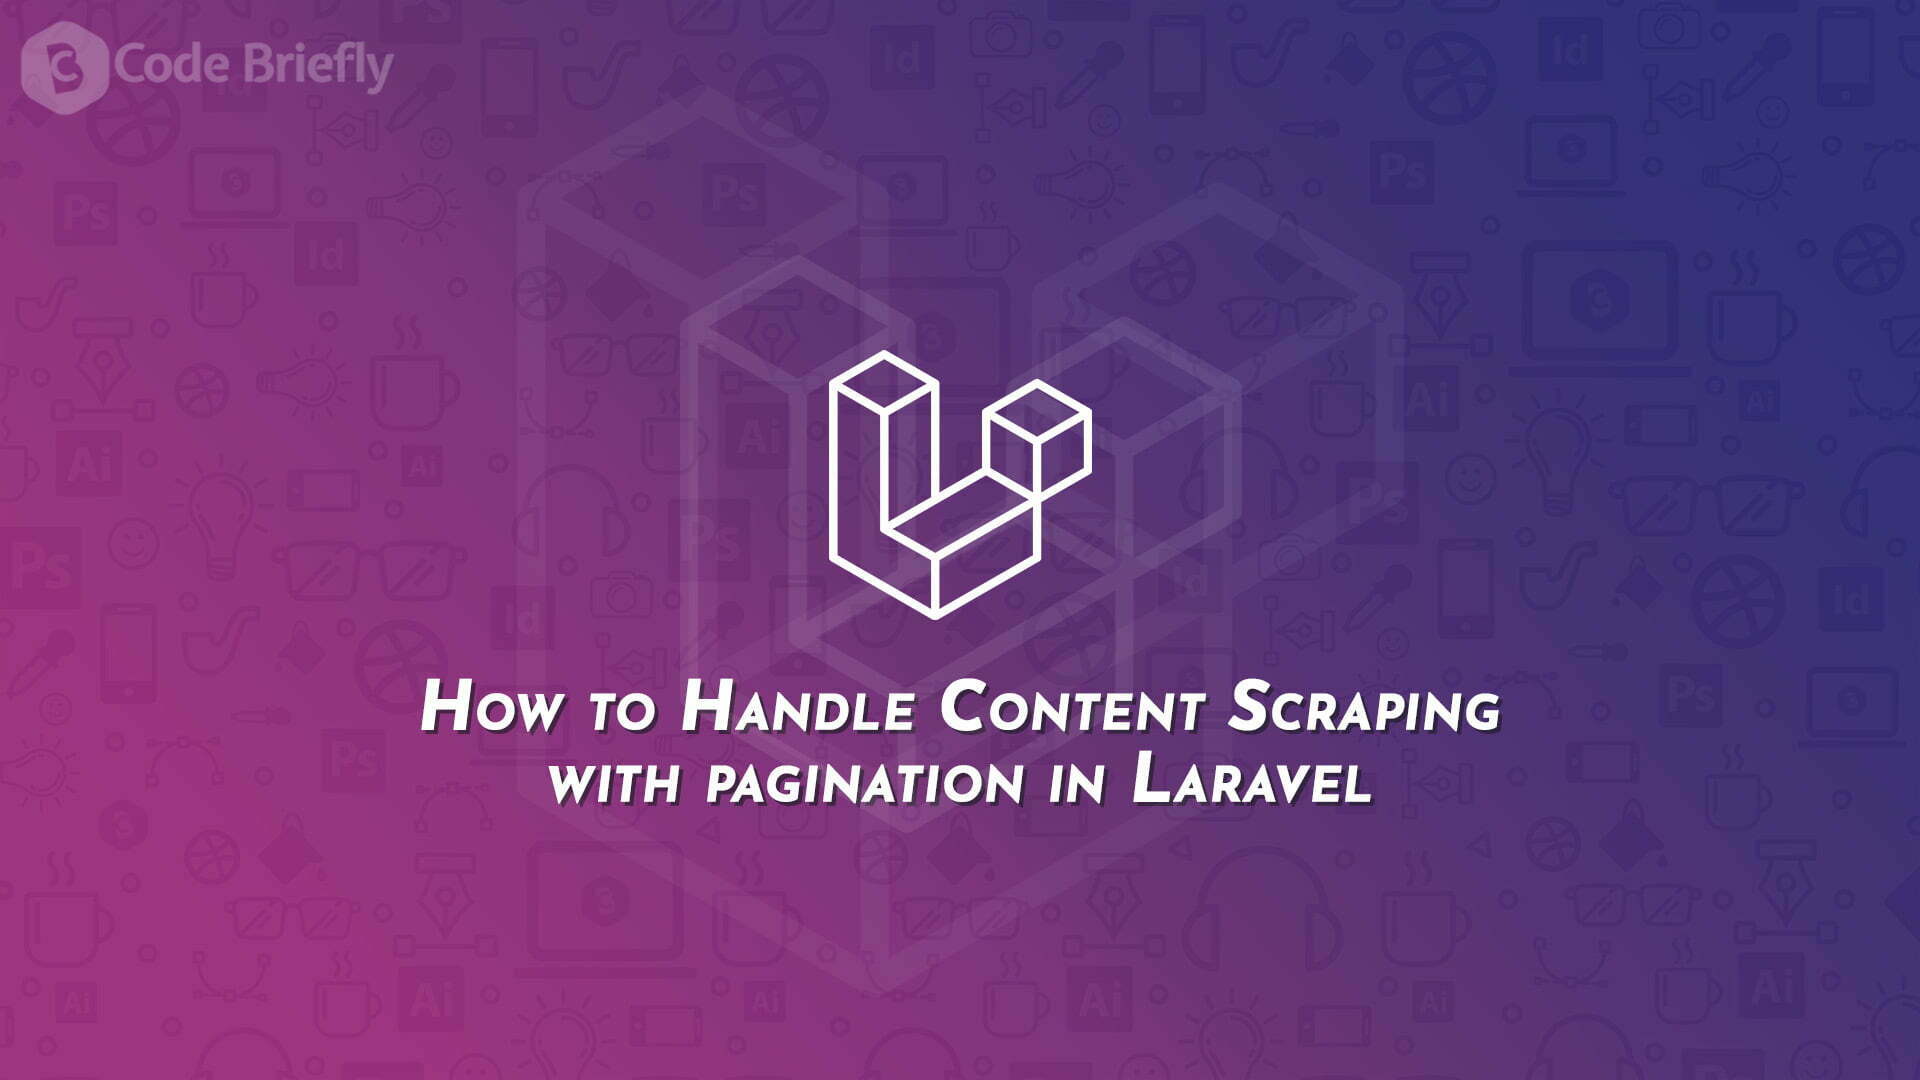 How to Handle Content Scraping with pagination in Laravel